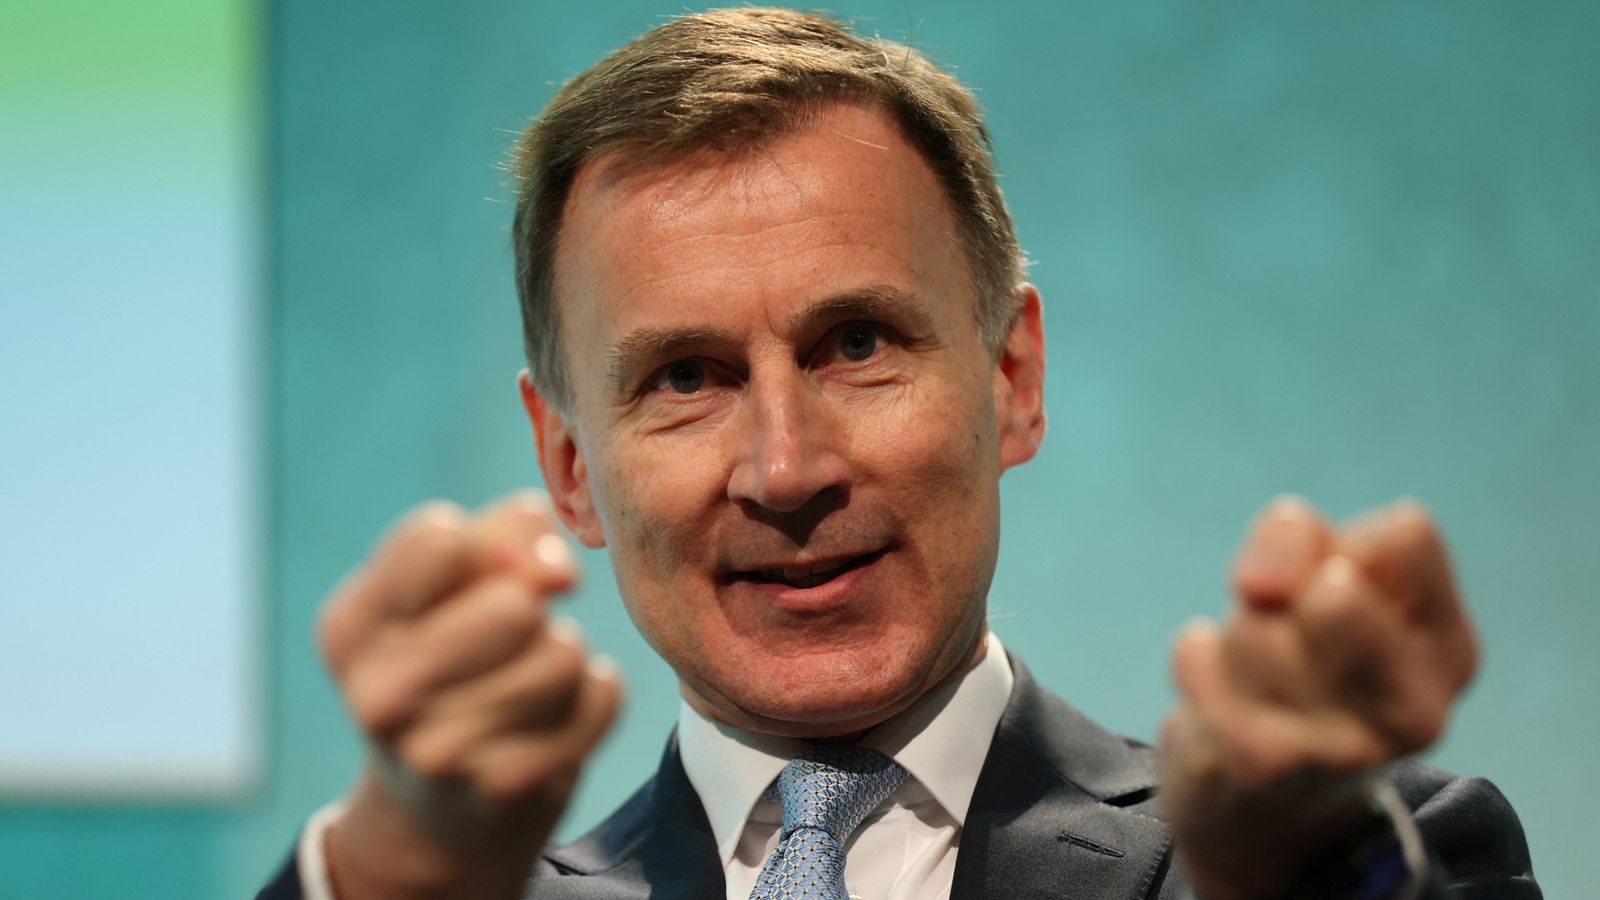 hunt looking to cut public sector spending to lower taxes, sky news understands